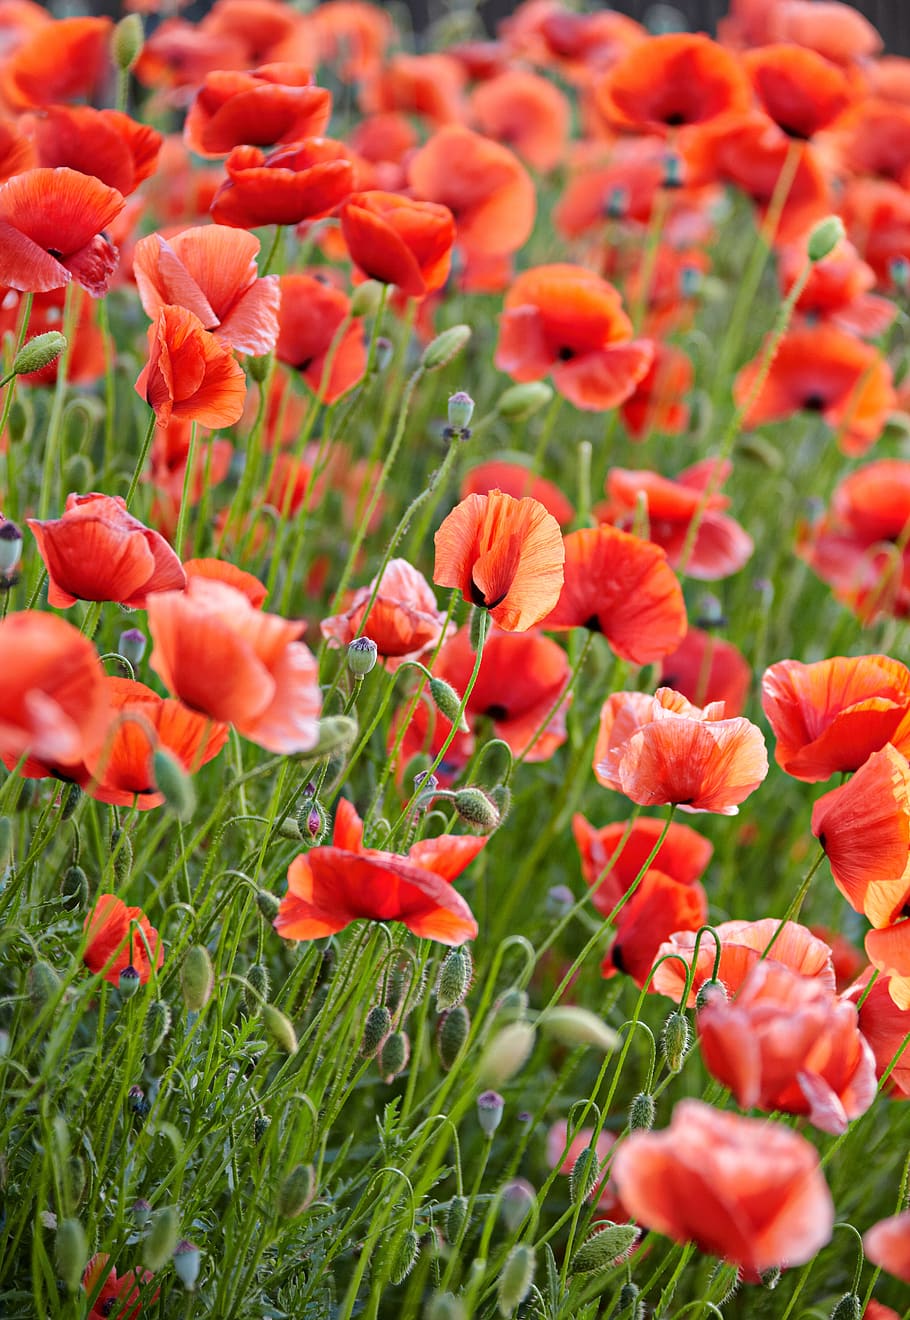 poppy, poppies, field of poppies, nature, plant, flowers, poppy flower, landscape, flowering plant, flower